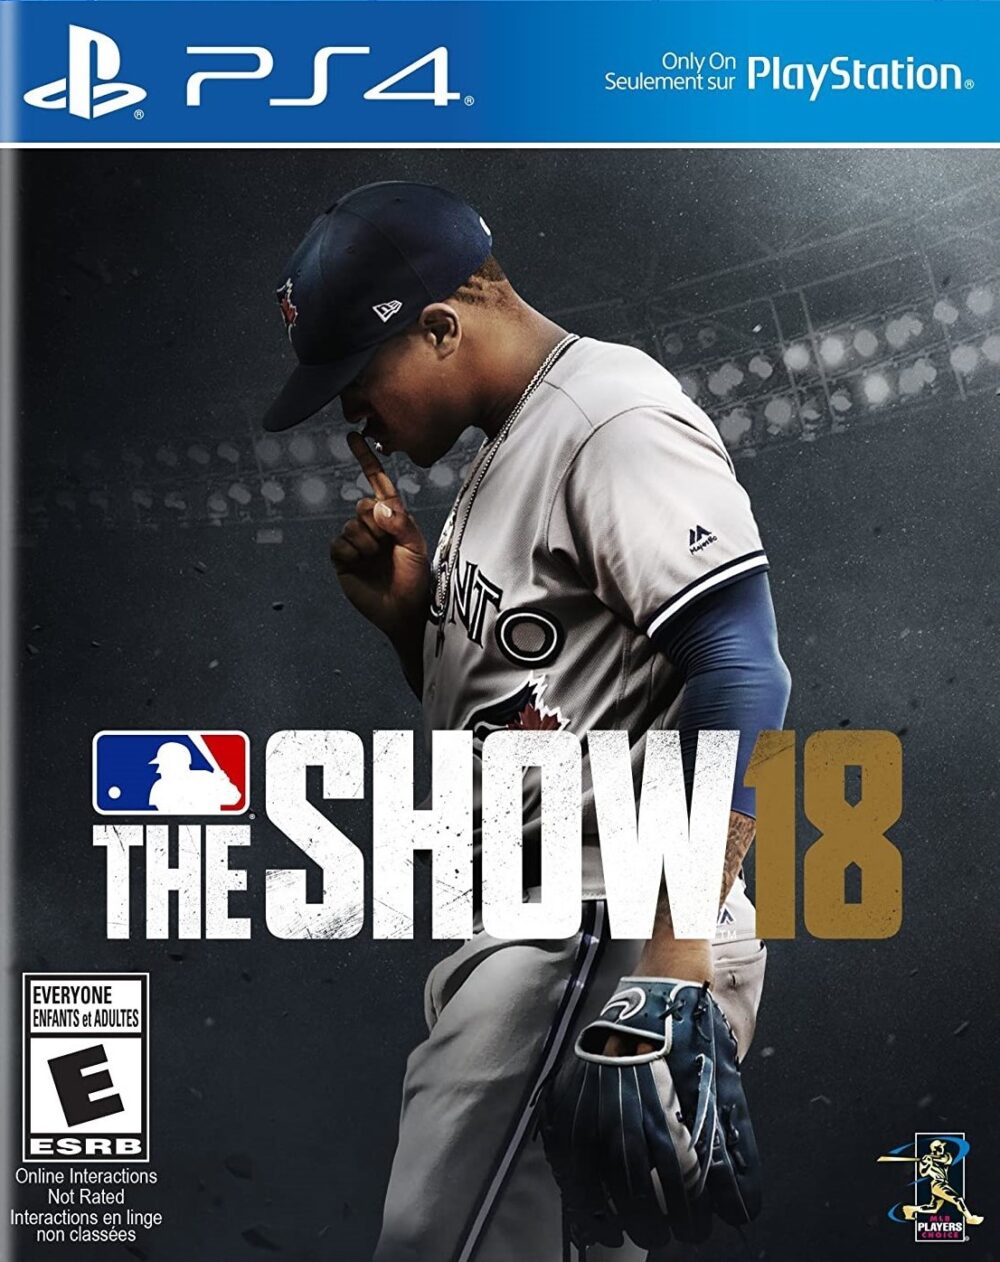 MLB The Show 18 for PS4